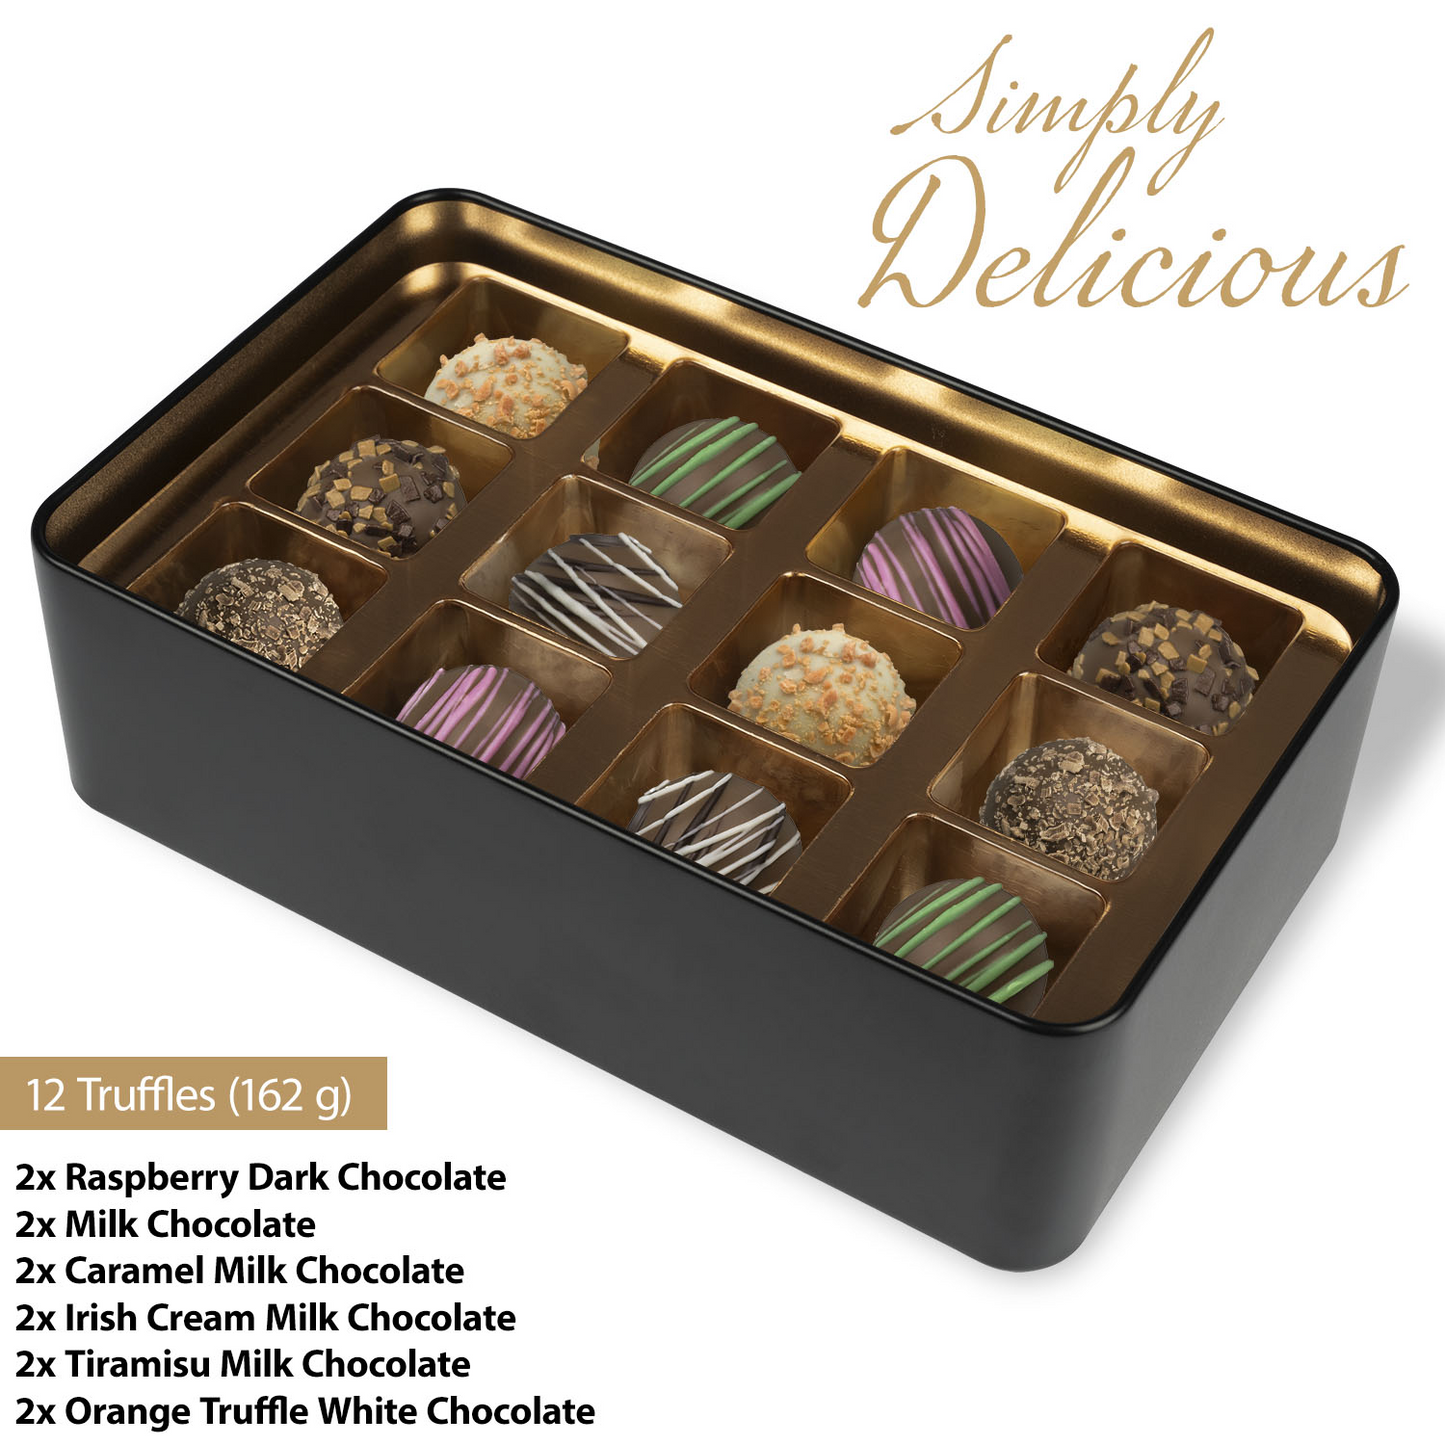 Happy Father's Day Dad We Love You Chocolate Truffles Gift Box, Gift for Dad